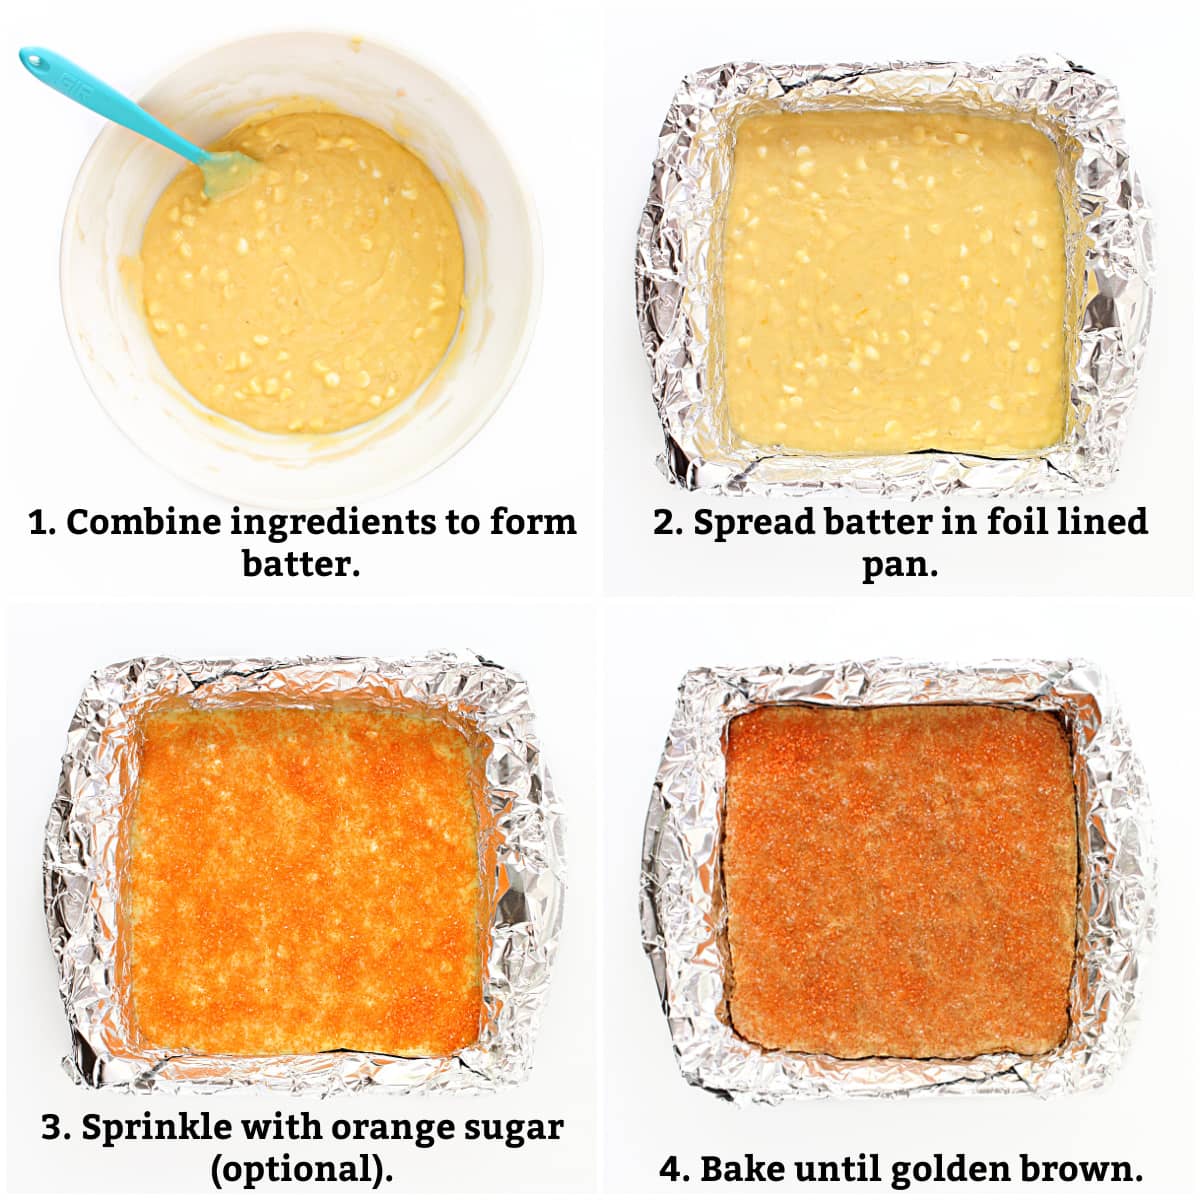 Instructions: combine ingredients to form batter, spread in pan, sprinkle decorating sugar on top, bake.